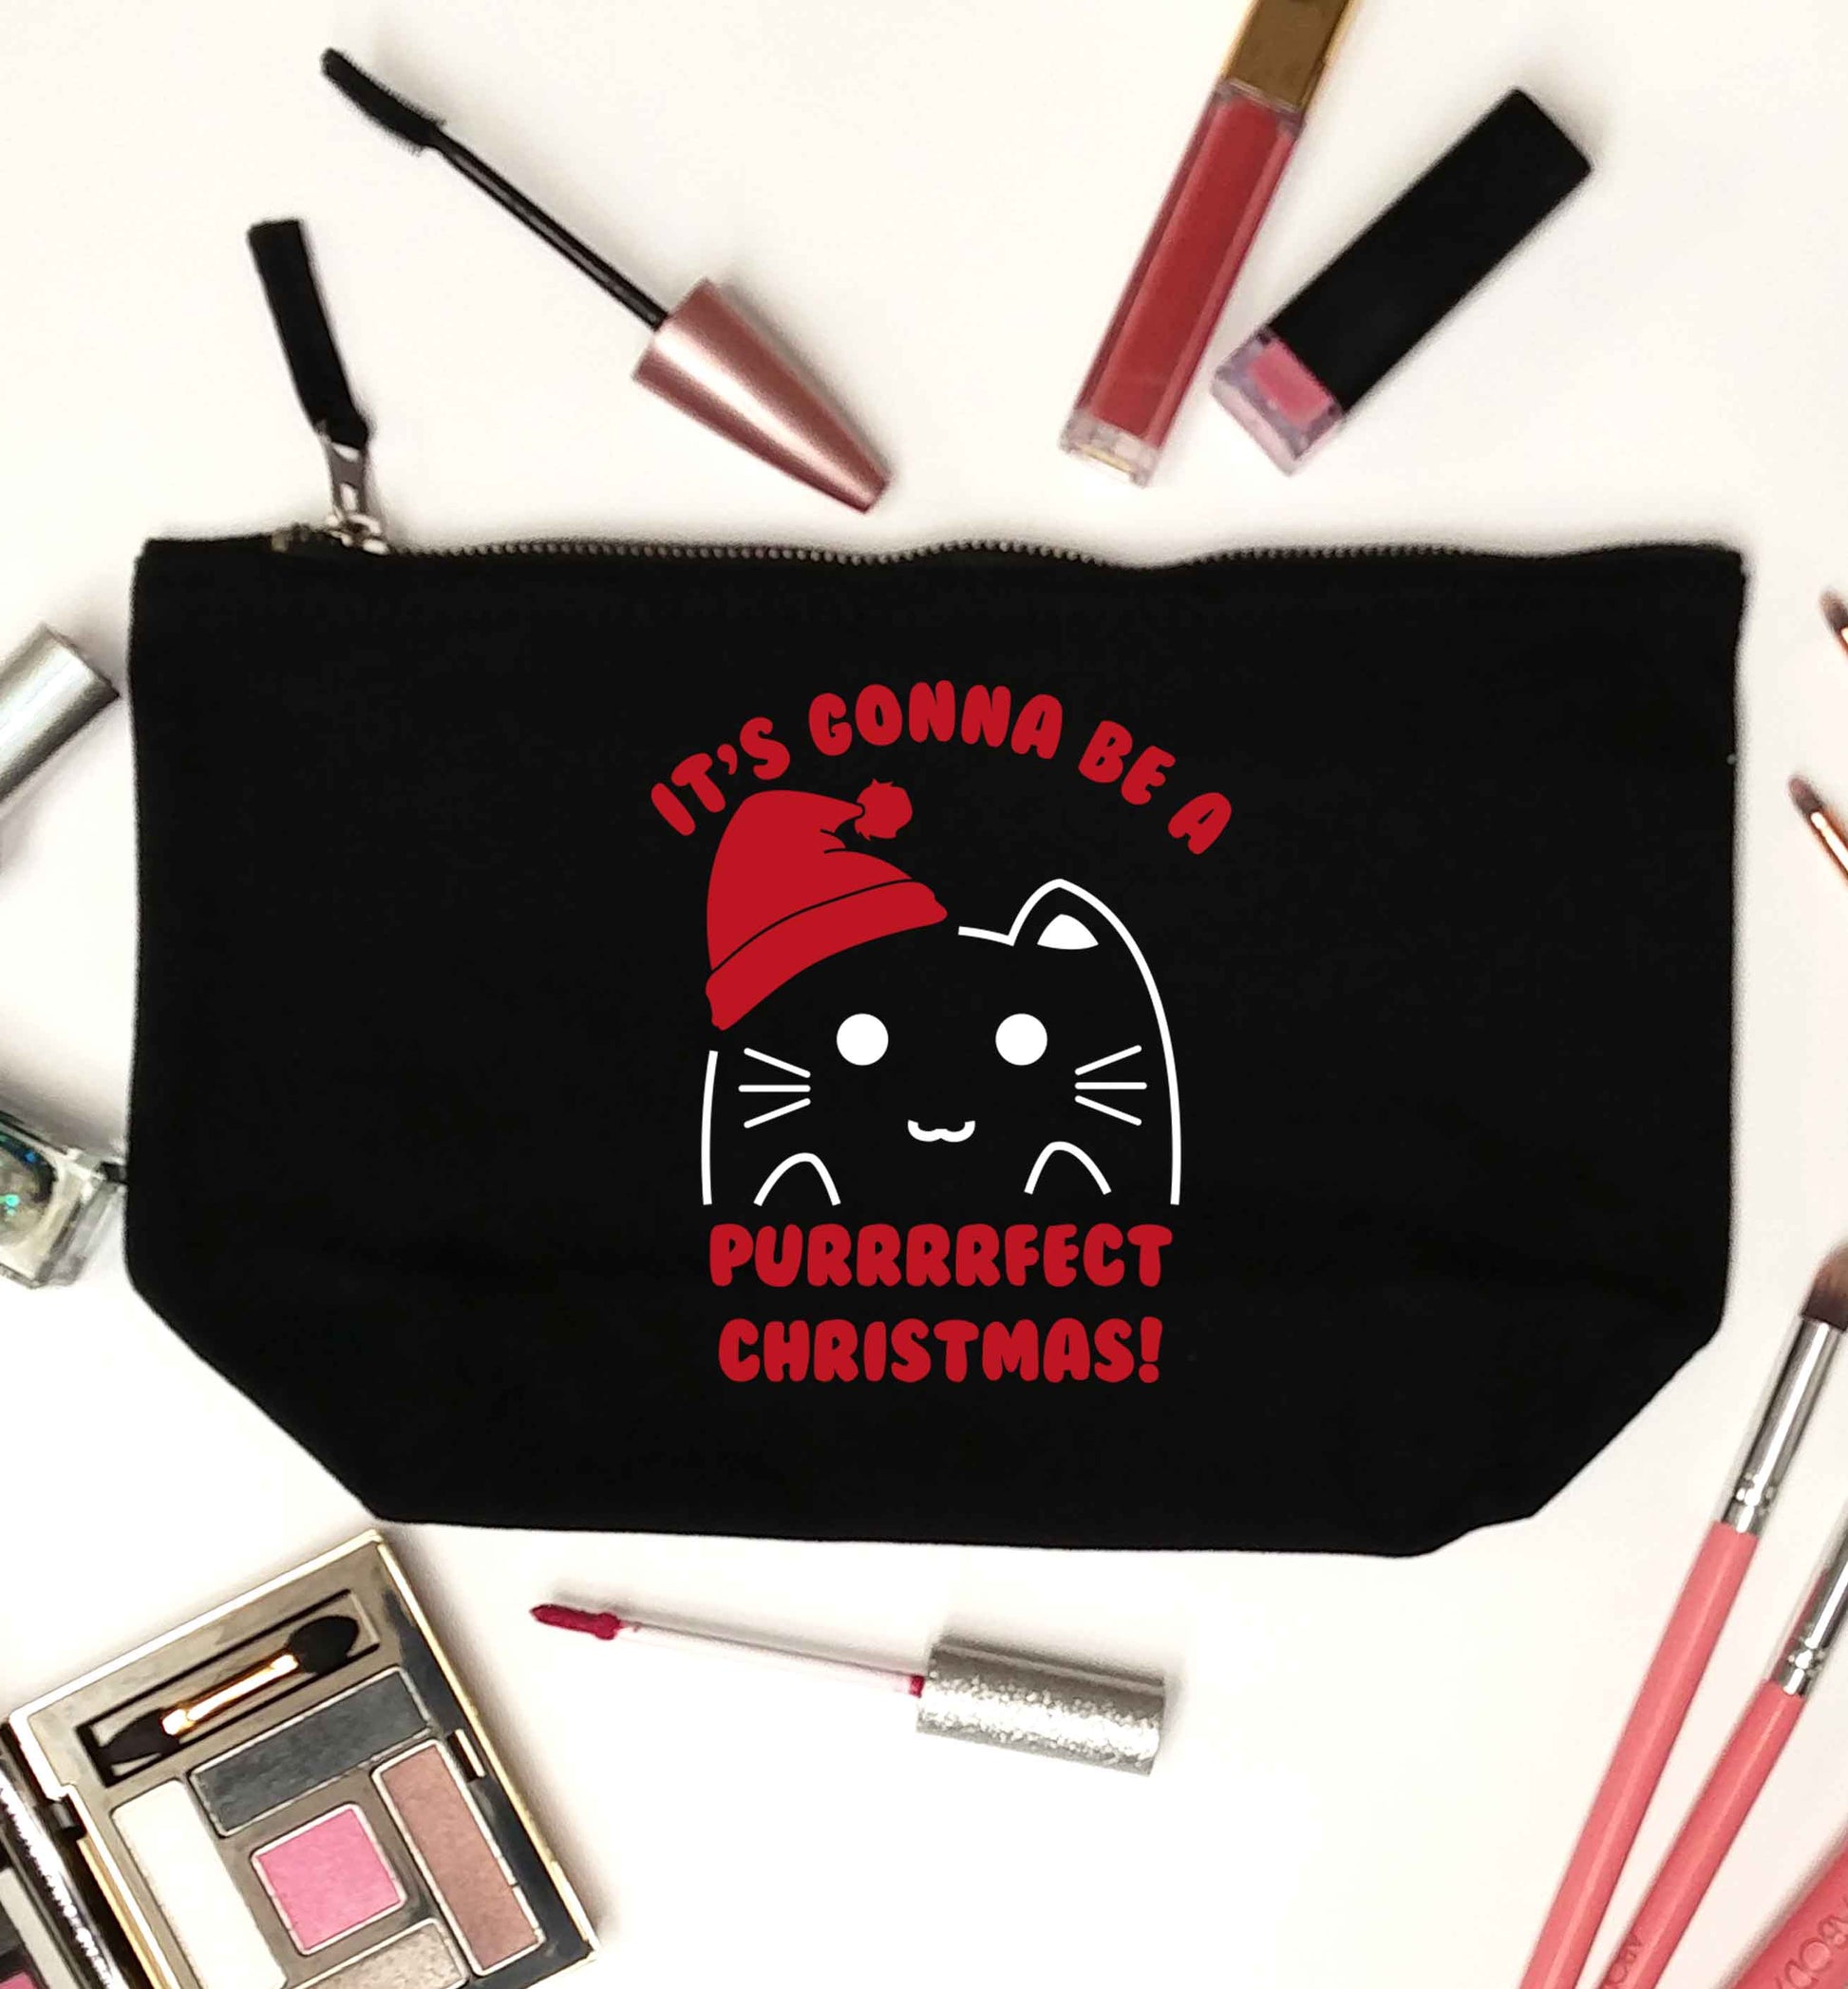 It's going to be a purrfect Christmas black makeup bag